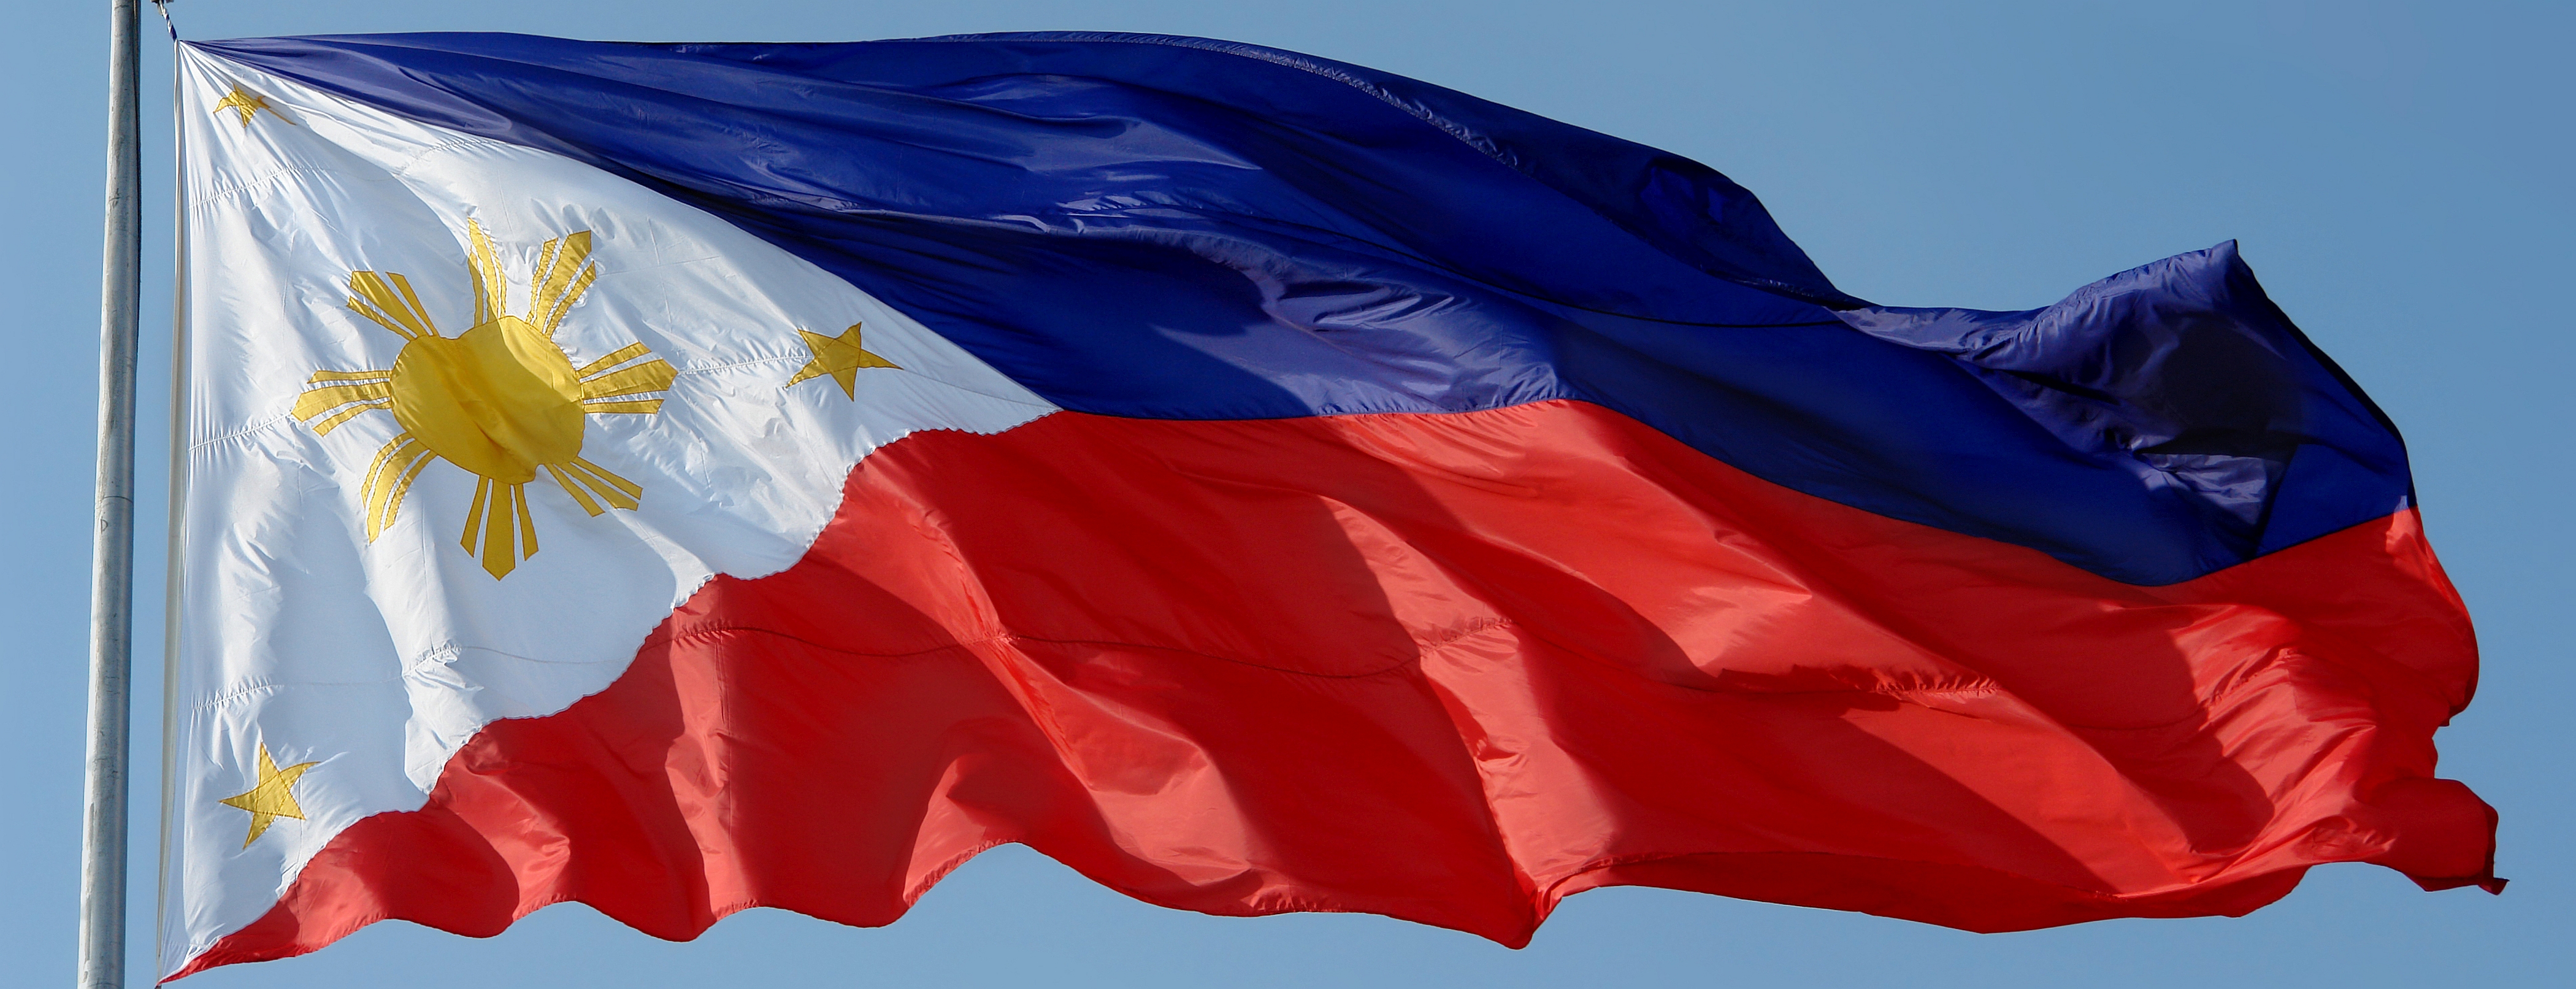 Misc Flag Of The Philippines HD Wallpaper